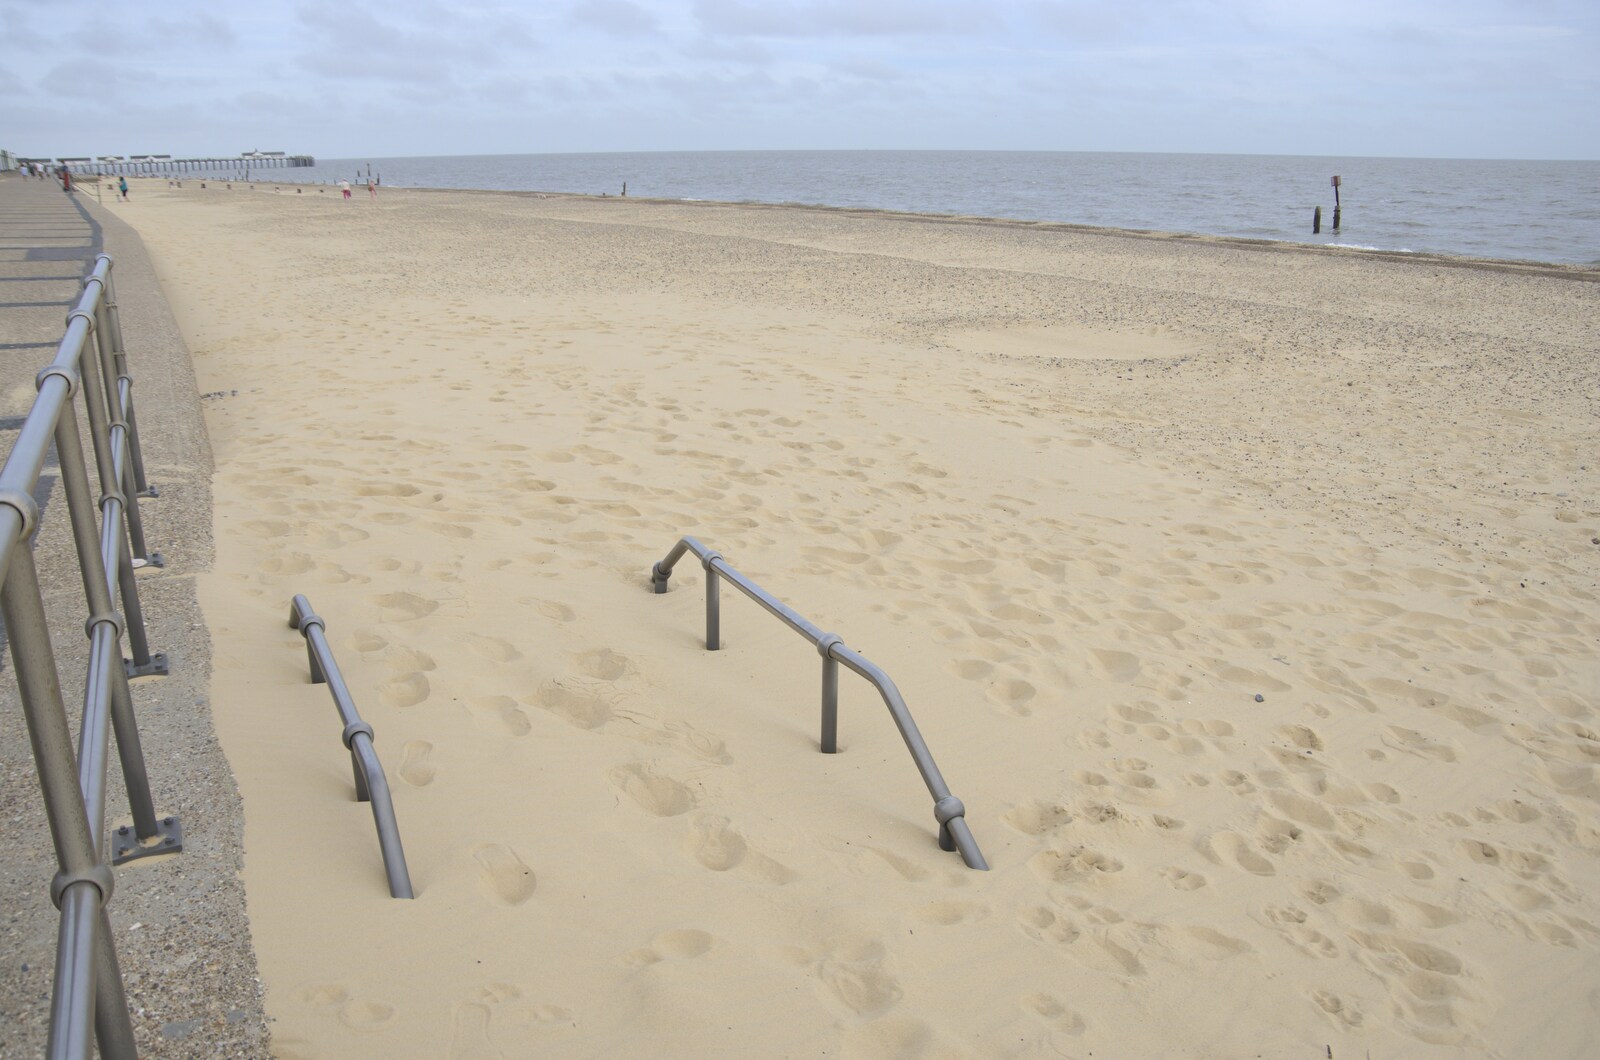 Steps over a groyne have been buried from The Waverley Paddle Steamer at Southwold Pier, Suffolk - 27th September 2023